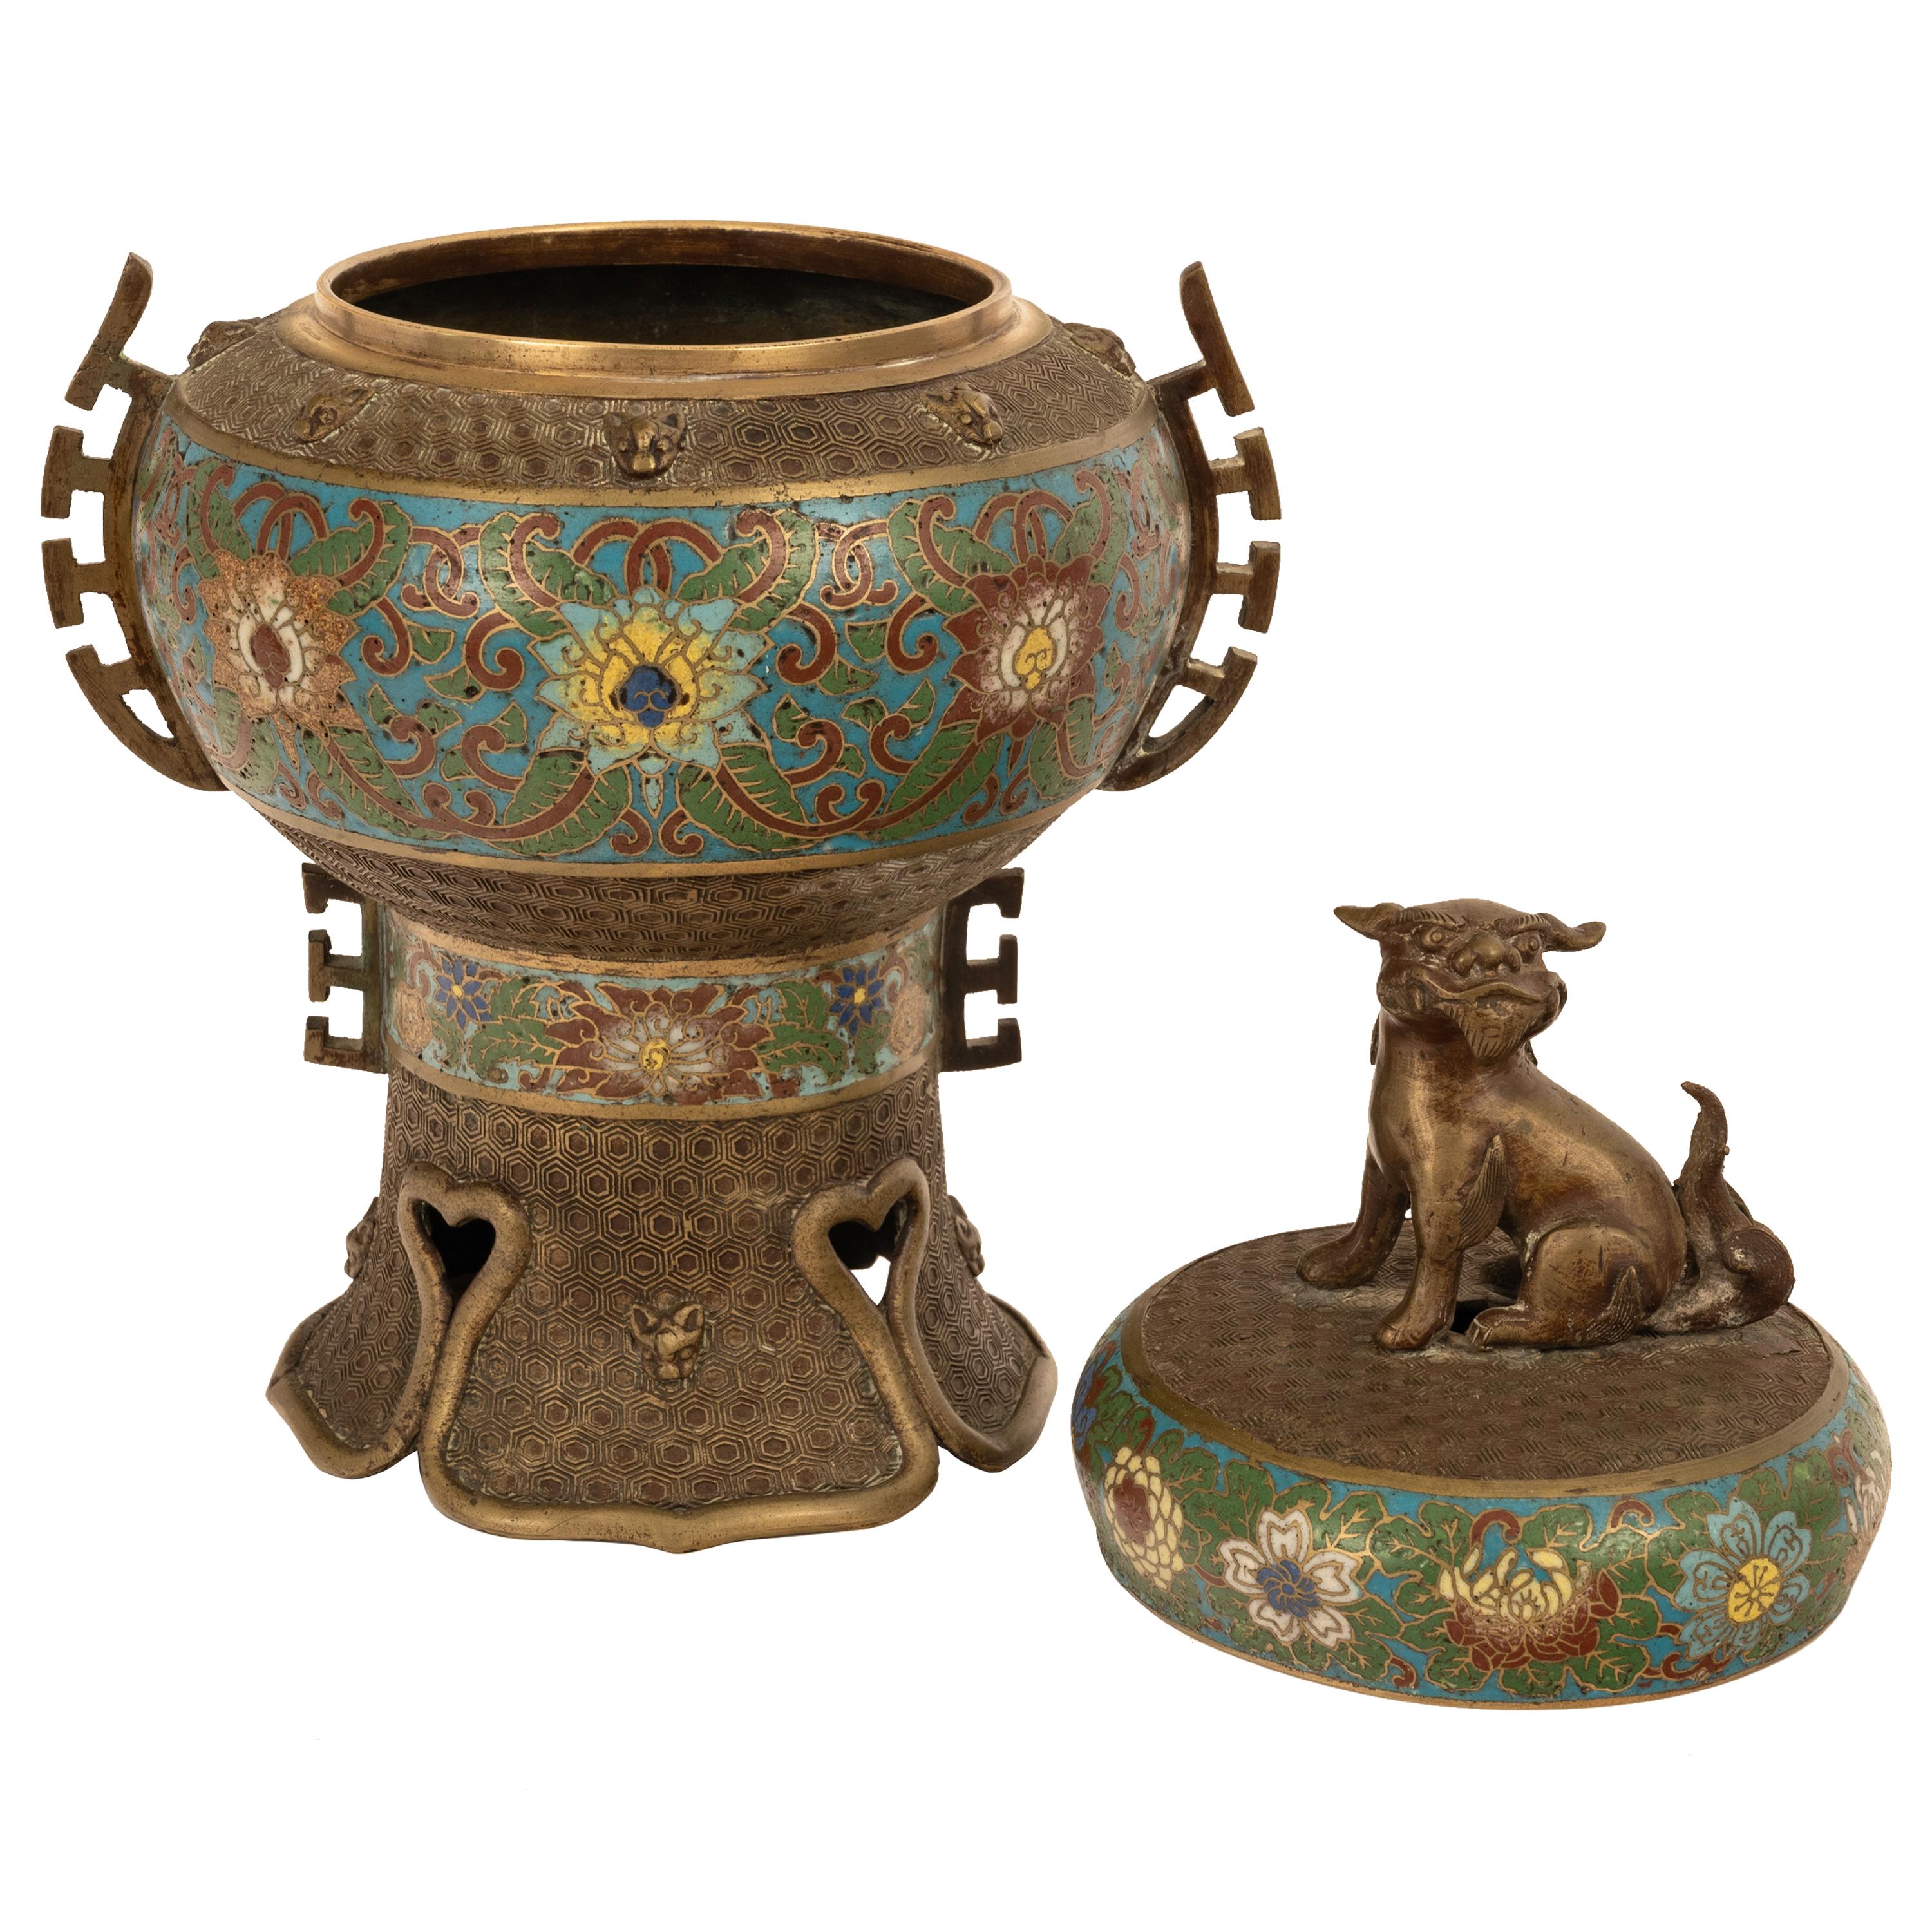 Early 20th Century Antique Chinese Qing Dynasty Bronze Cloisonne Enamel Censer Insence Burner 1900 For Sale